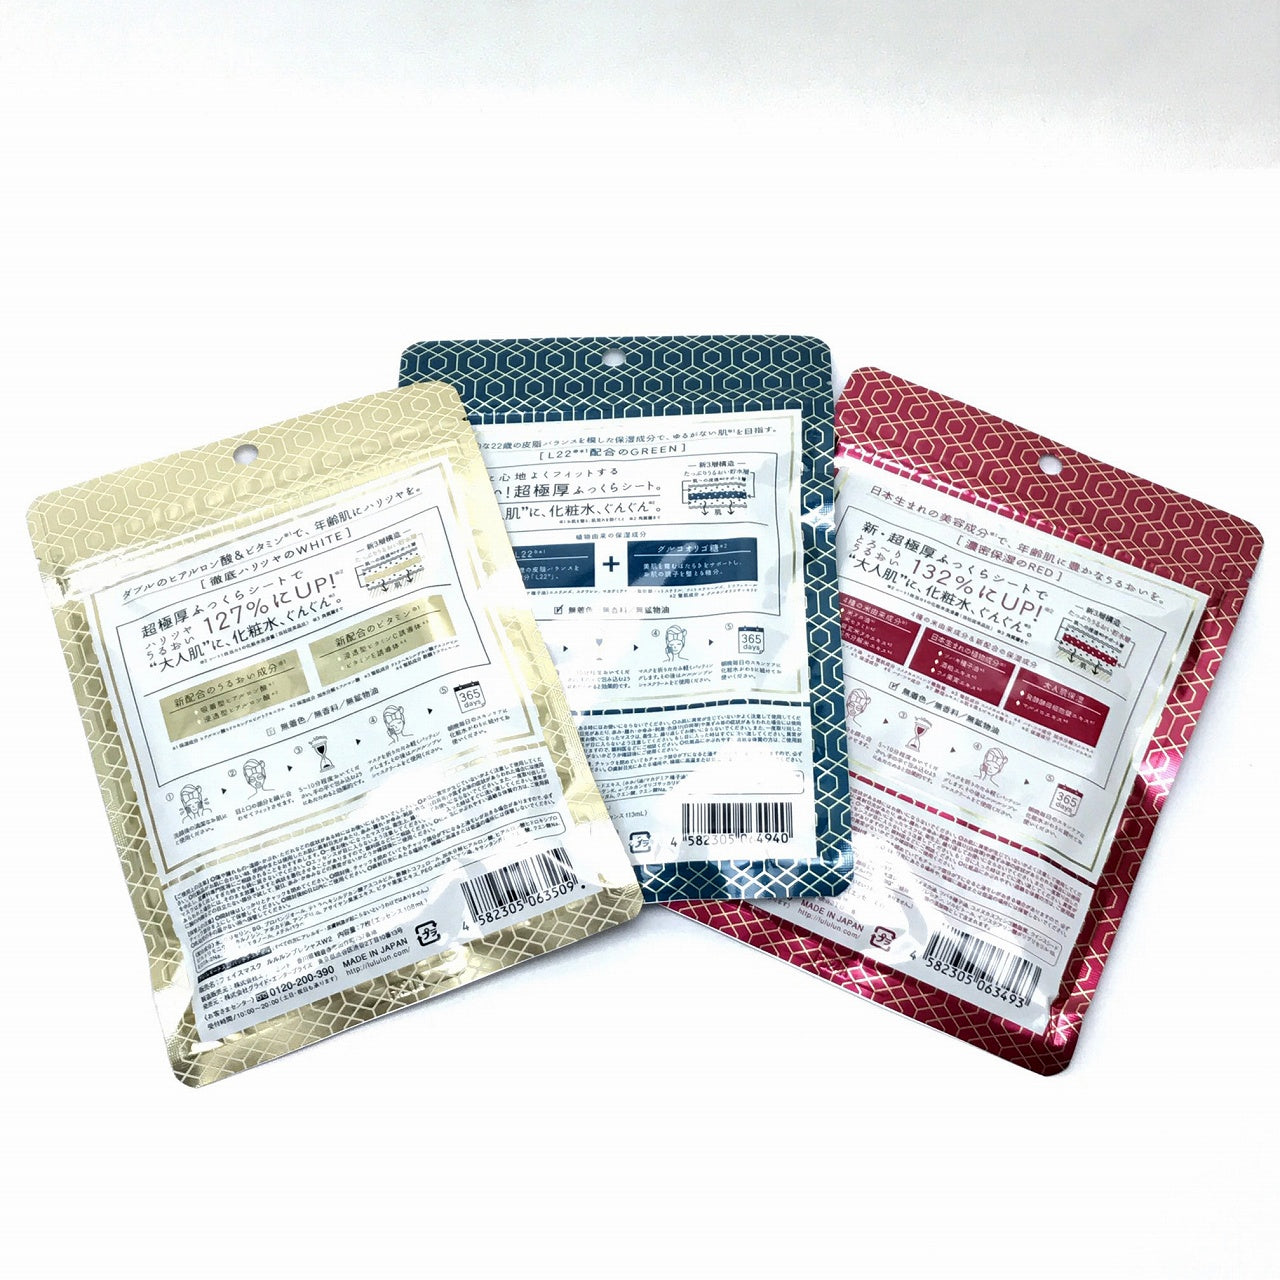 LuLuLun Precious Japanese Face Mask 1 Pack 7 Sheets Choose One - brandshop-reference